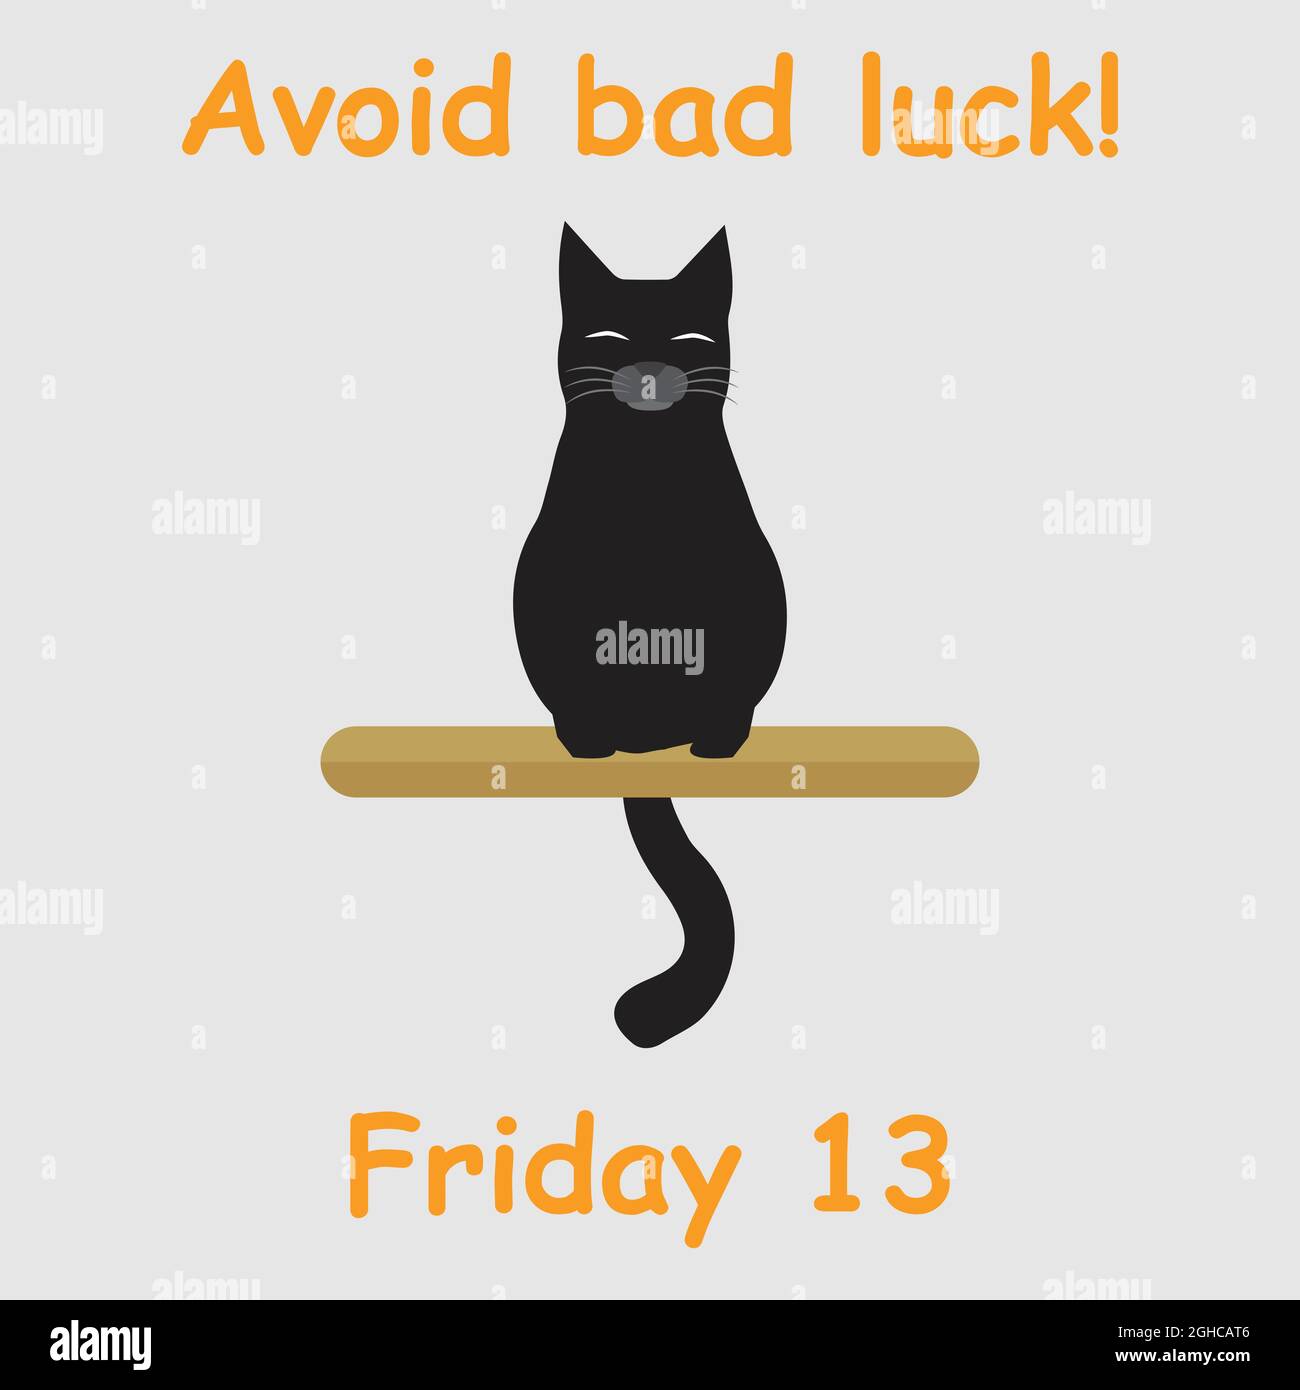 Black cat with the text “avoid bad luck Friday 13” Stock Vector